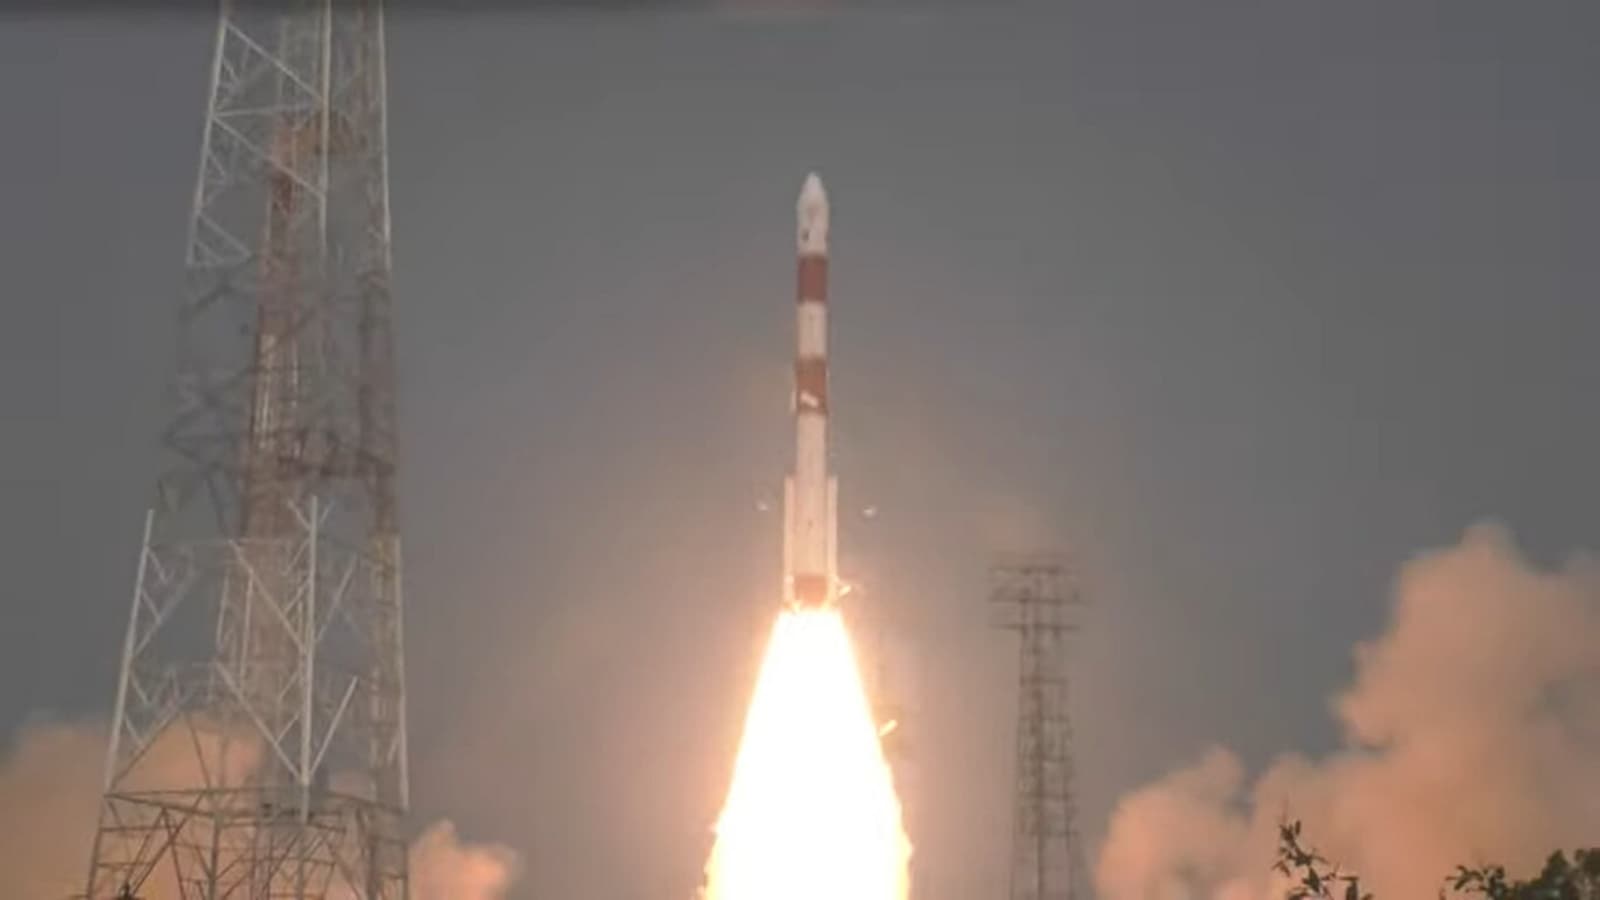 XPoSat Mission launched! After Chandrayaan-3 mission, Aditya-L1 mission triumphs, ISRO takes one other massive step